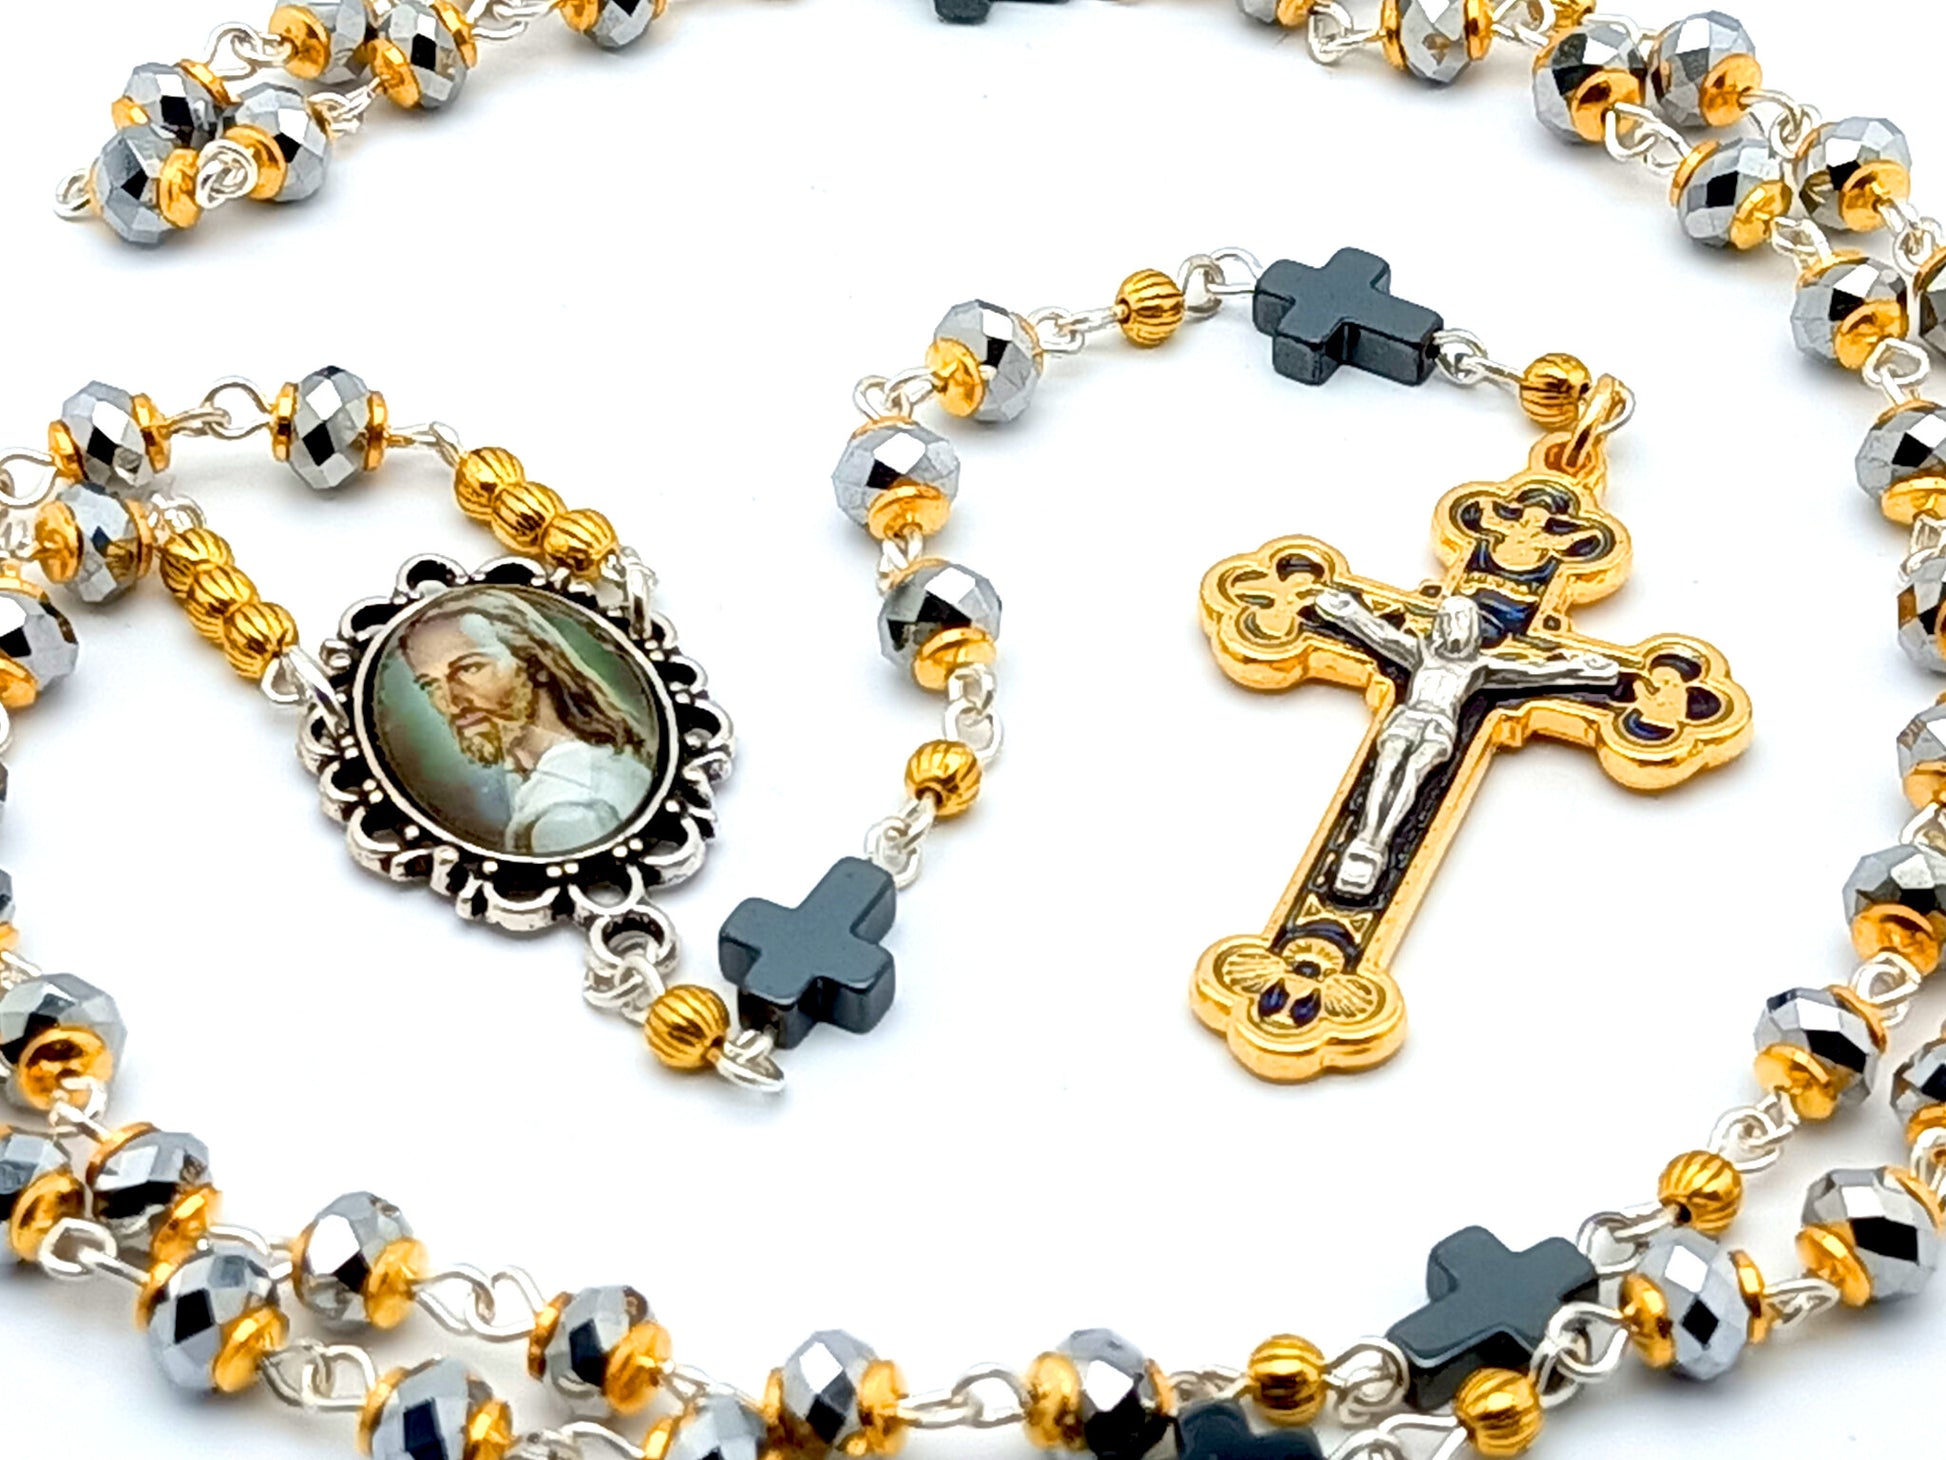 Holy Face of Jesus unique rosary beads with silver faceted glass and hematite beads, gold and silver crucifix and picture centre medal.